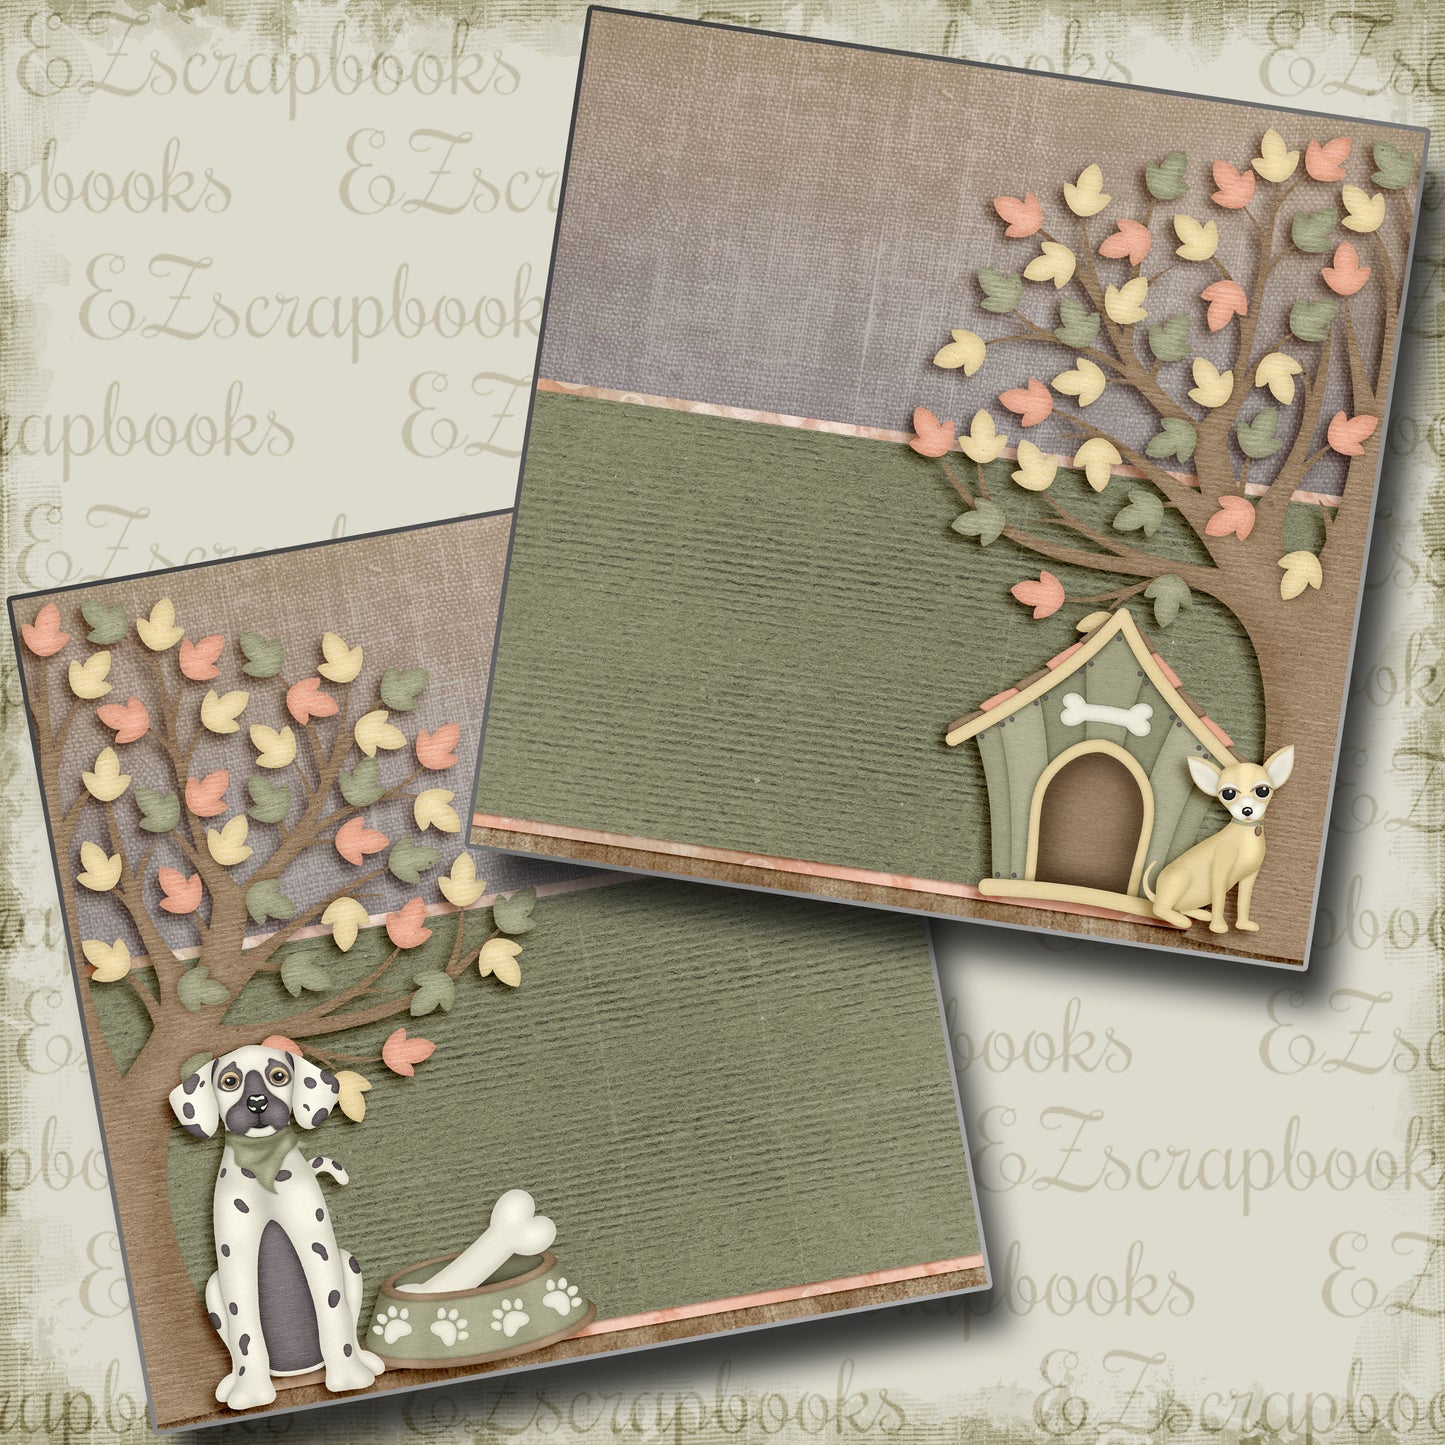 Dogs Are Awesome NPM - 3865 - EZscrapbooks Scrapbook Layouts dogs, Pets